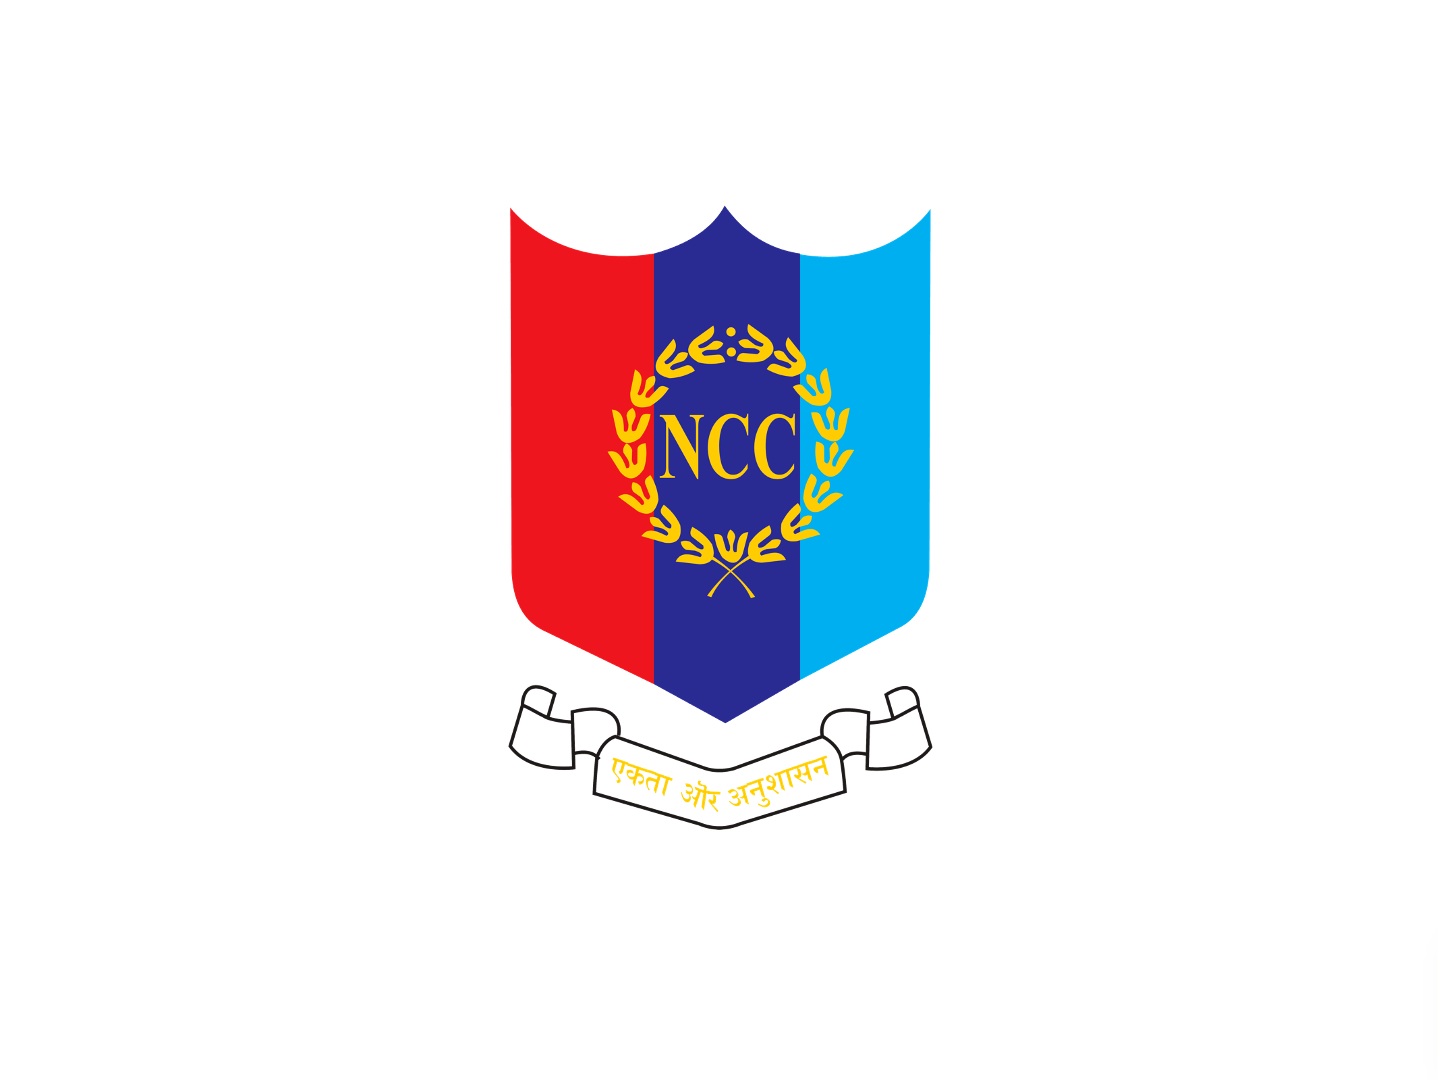 NCC Solutions